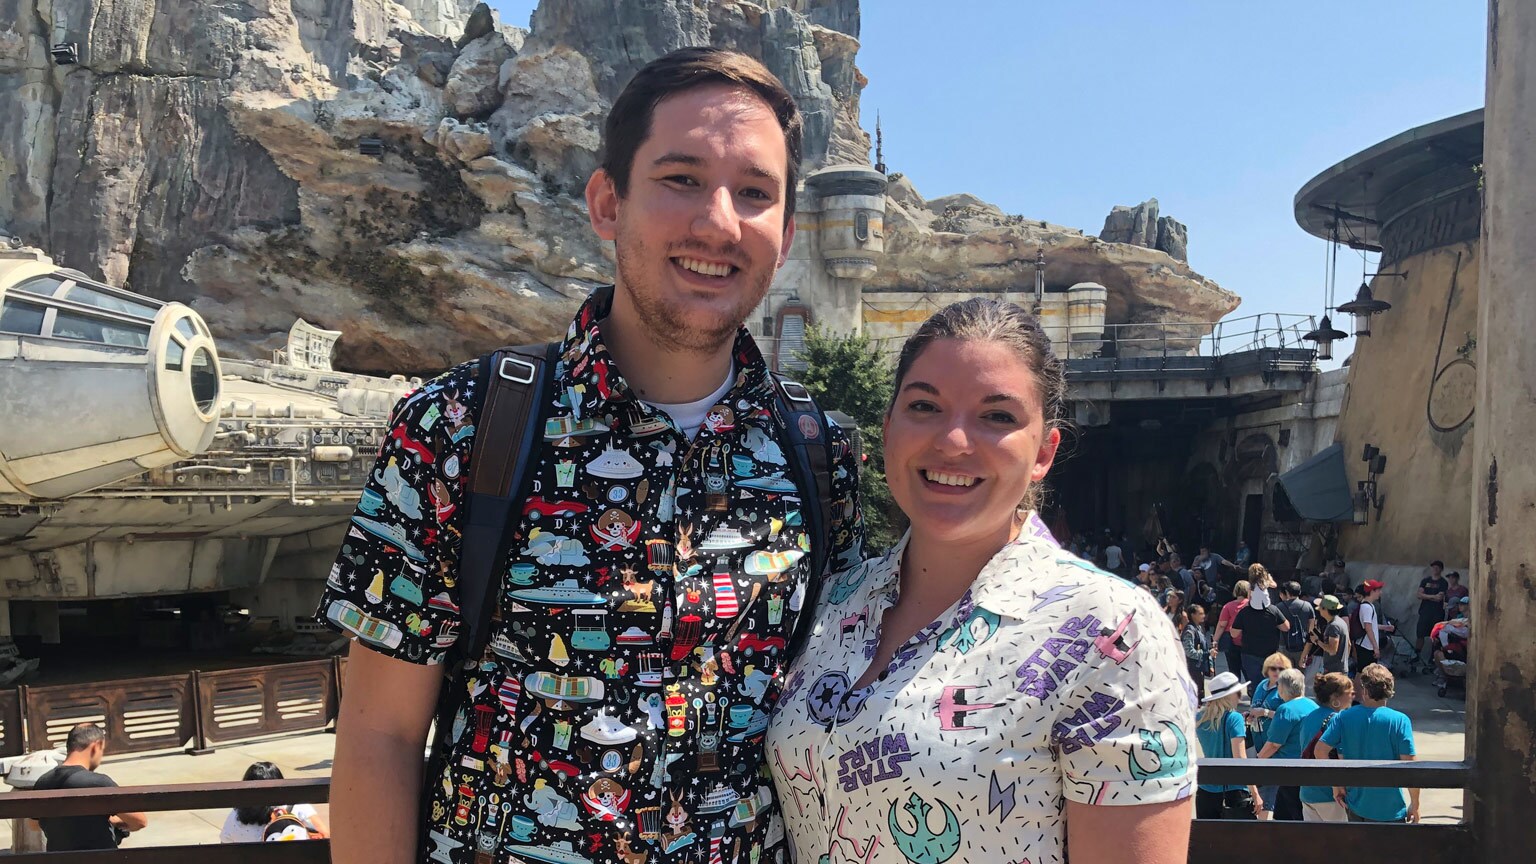 'This Is All A Dream Come True': Fans Share Their Star Wars: Galaxy’s Edge Reactions